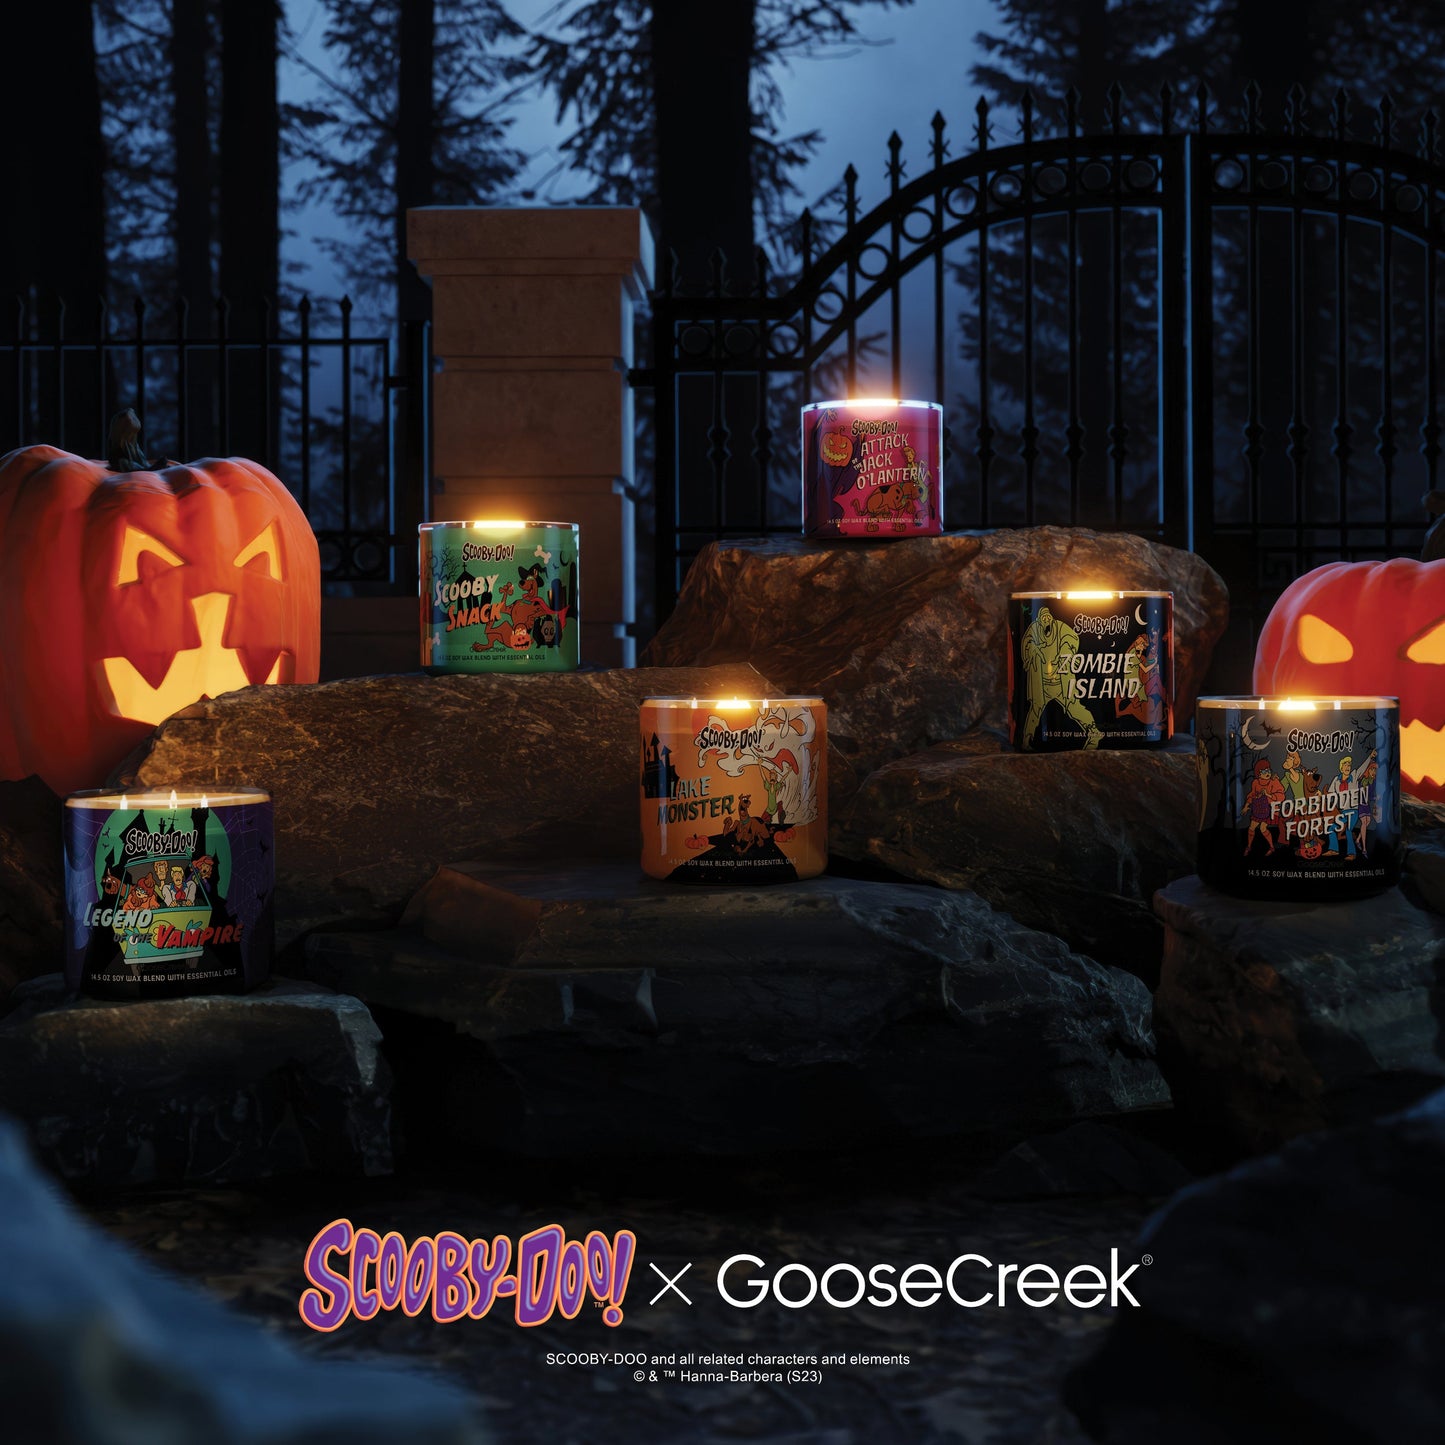 Scooby Snack 3-Wick Scooby Doo Candle